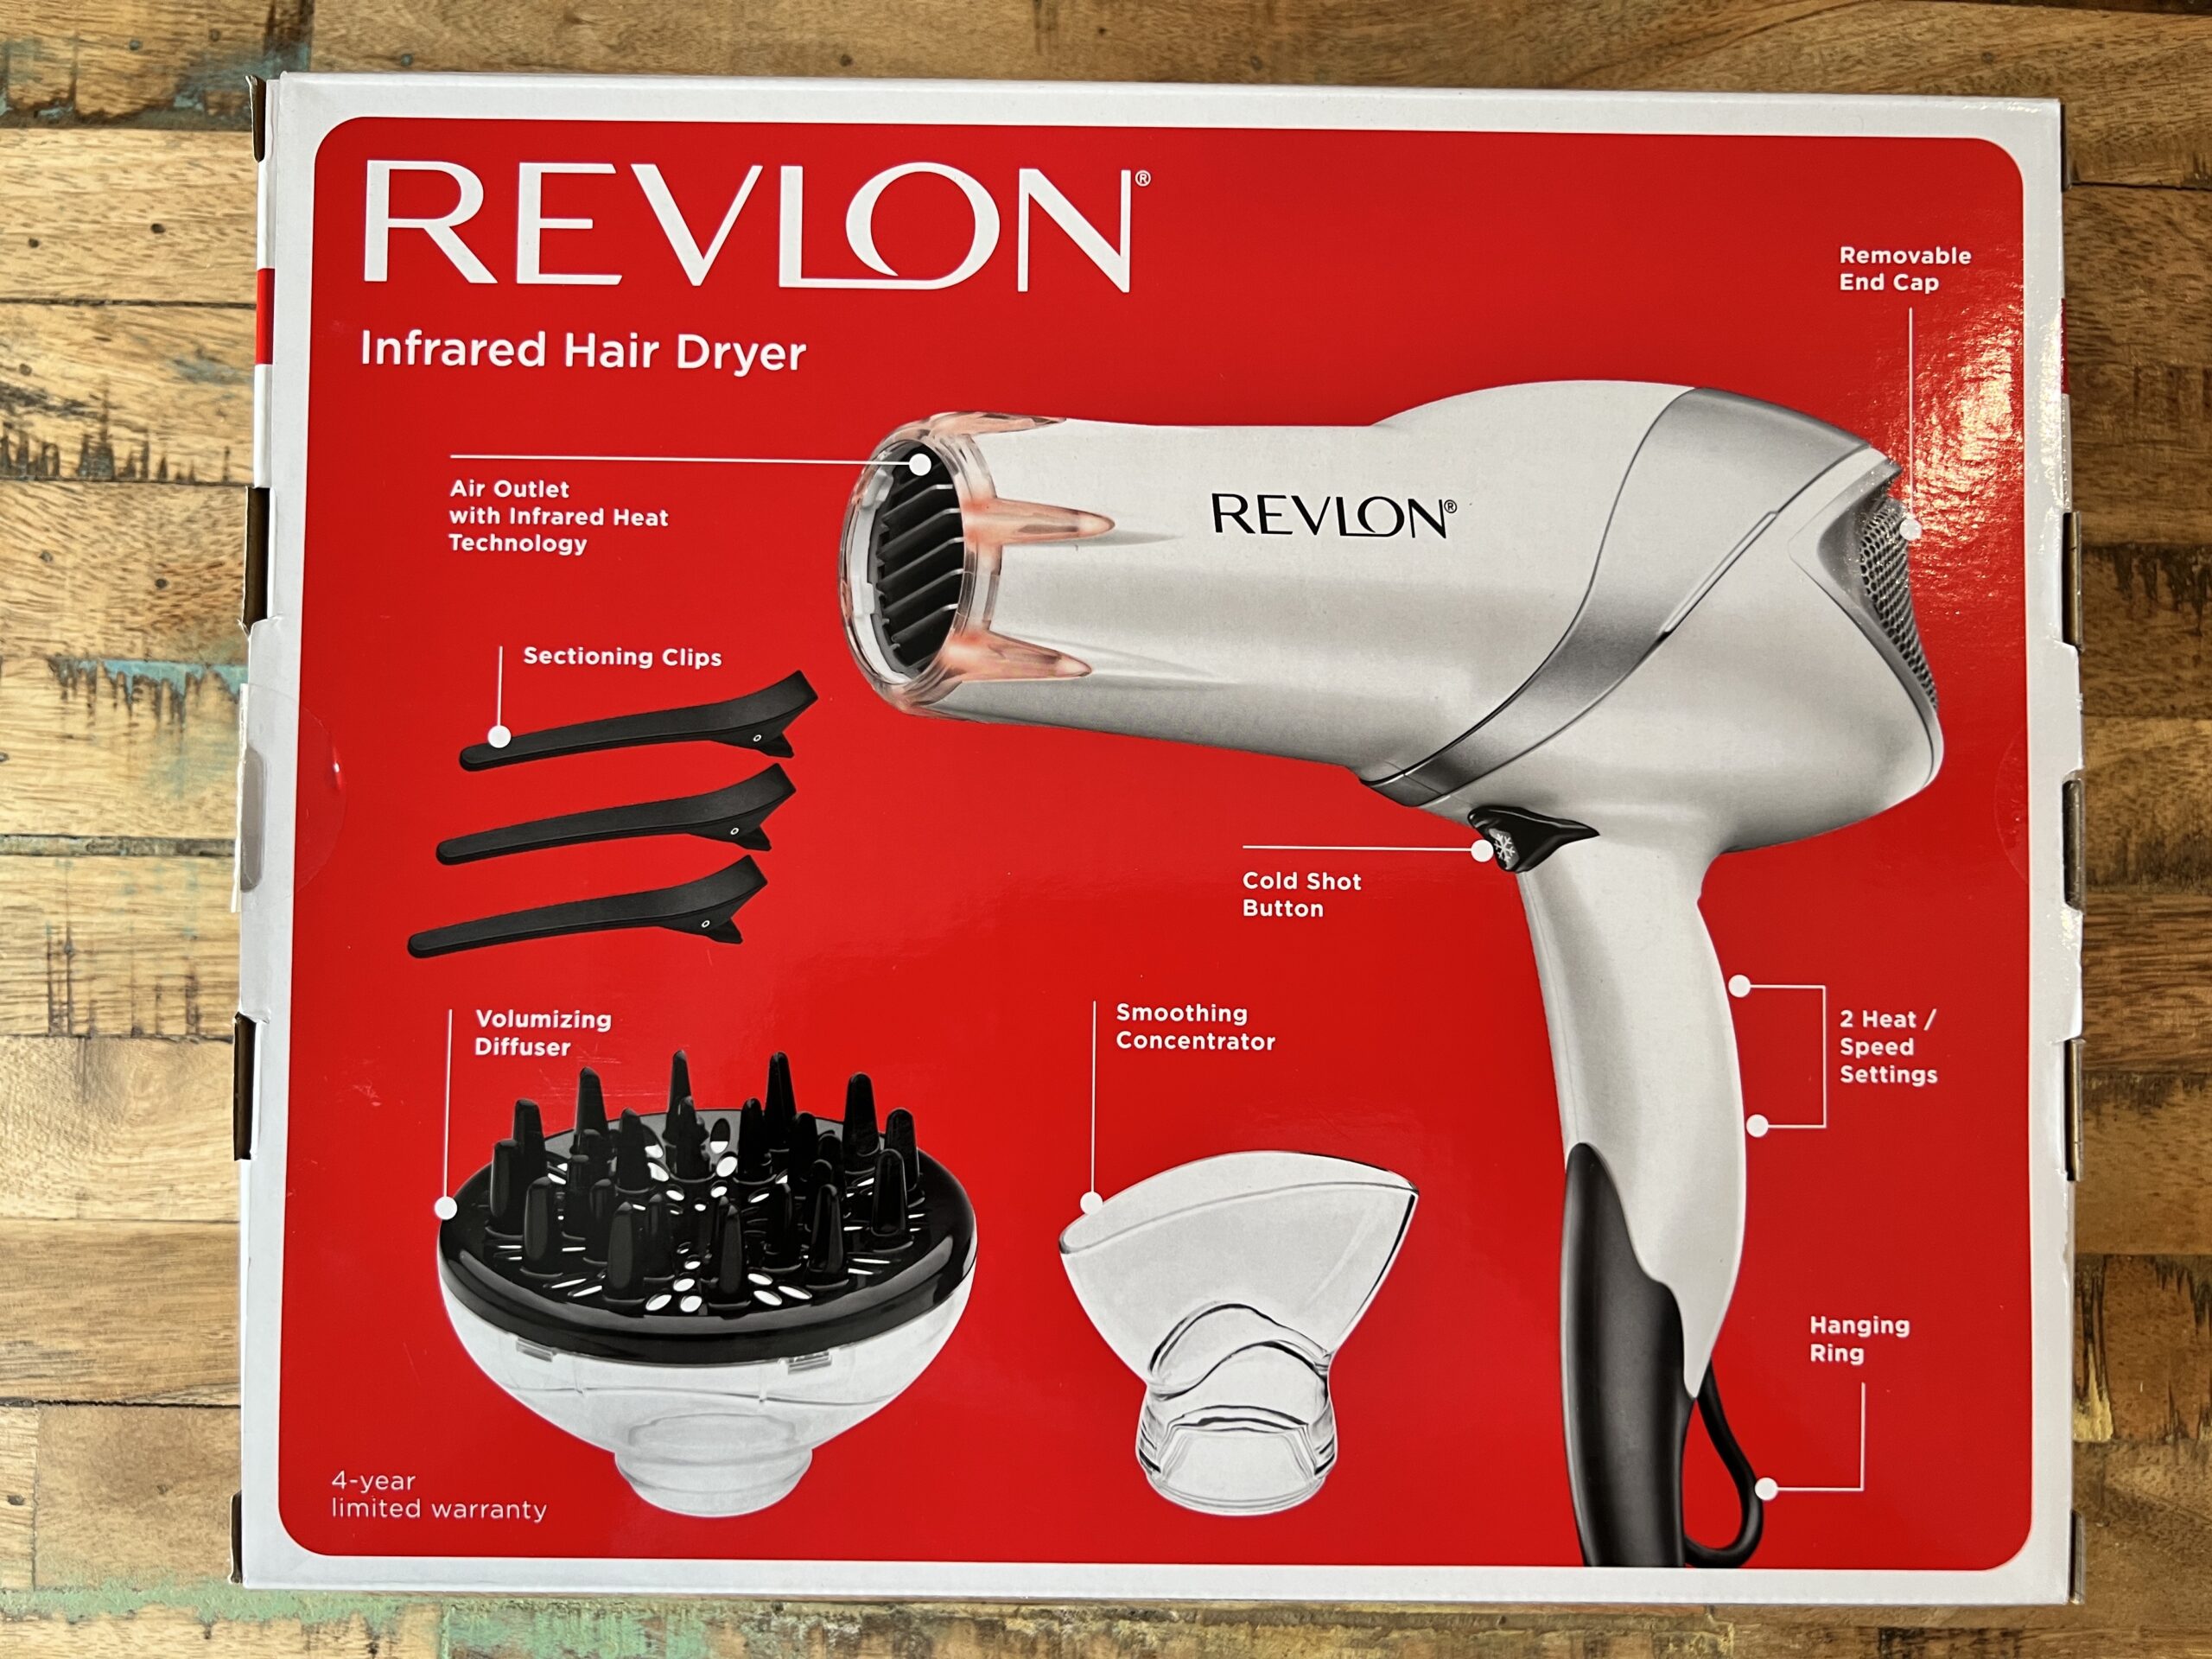 The Revlon infrared hair dryer box contents include the dryer, sectioning clips, volumizing diffuser, and smoothing concentrator.